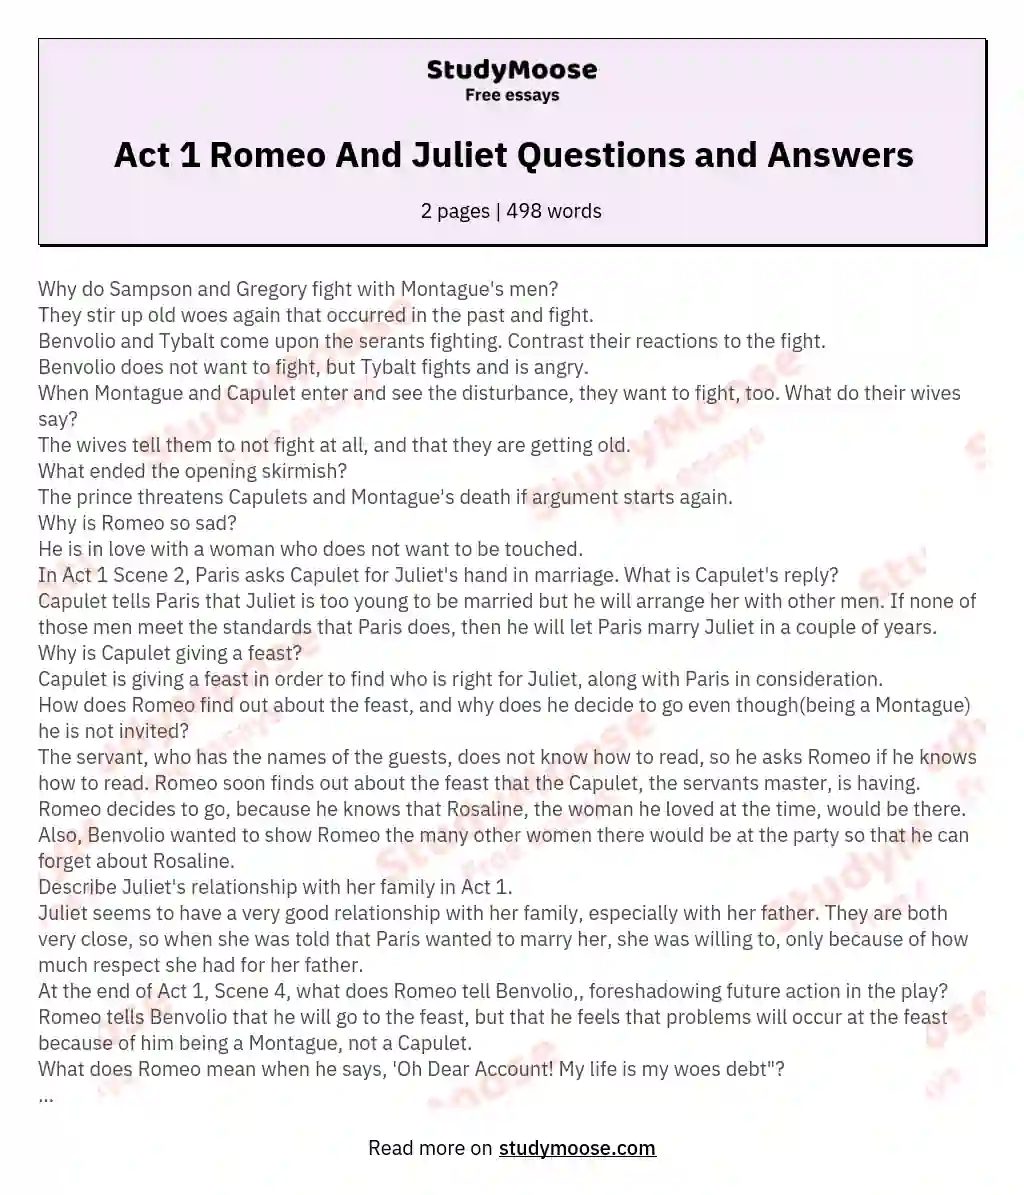 Act 1 Romeo And Juliet Questions and Answers essay